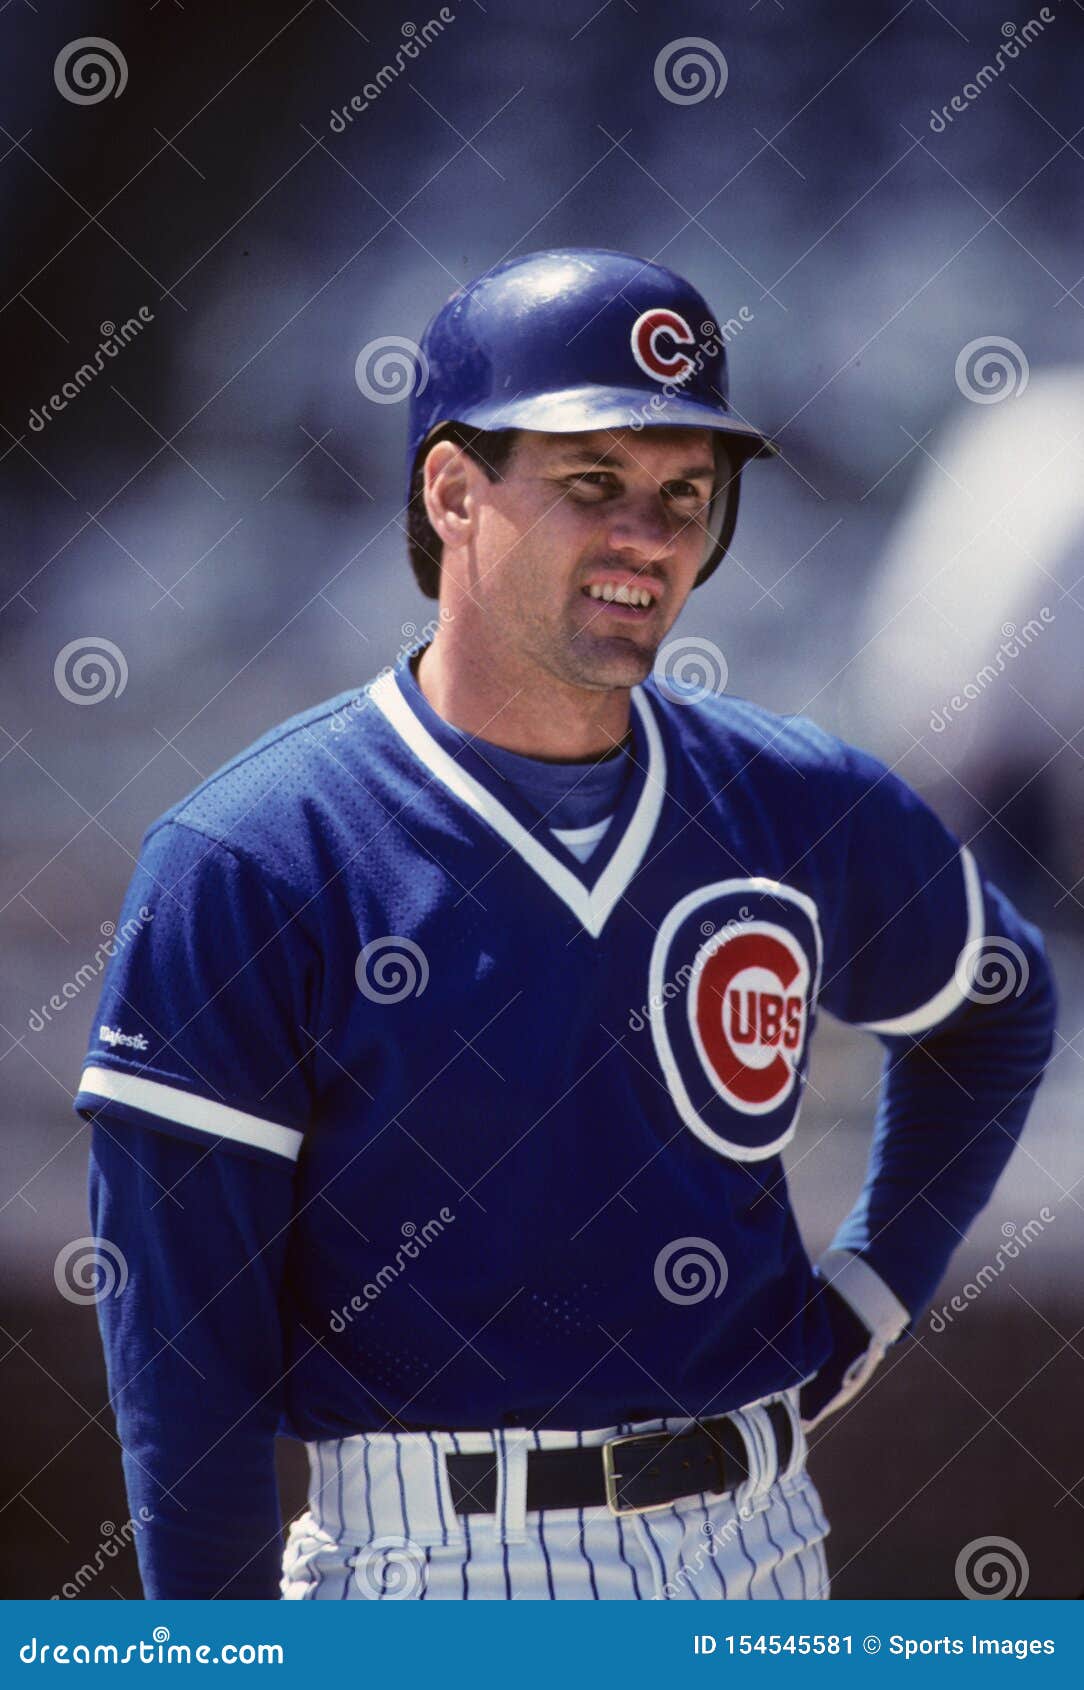 1988 RYNE SANDBERG Chicago Cubs BASEBALL ACTION Glossy Photo 8x10 PICTURE WOW!